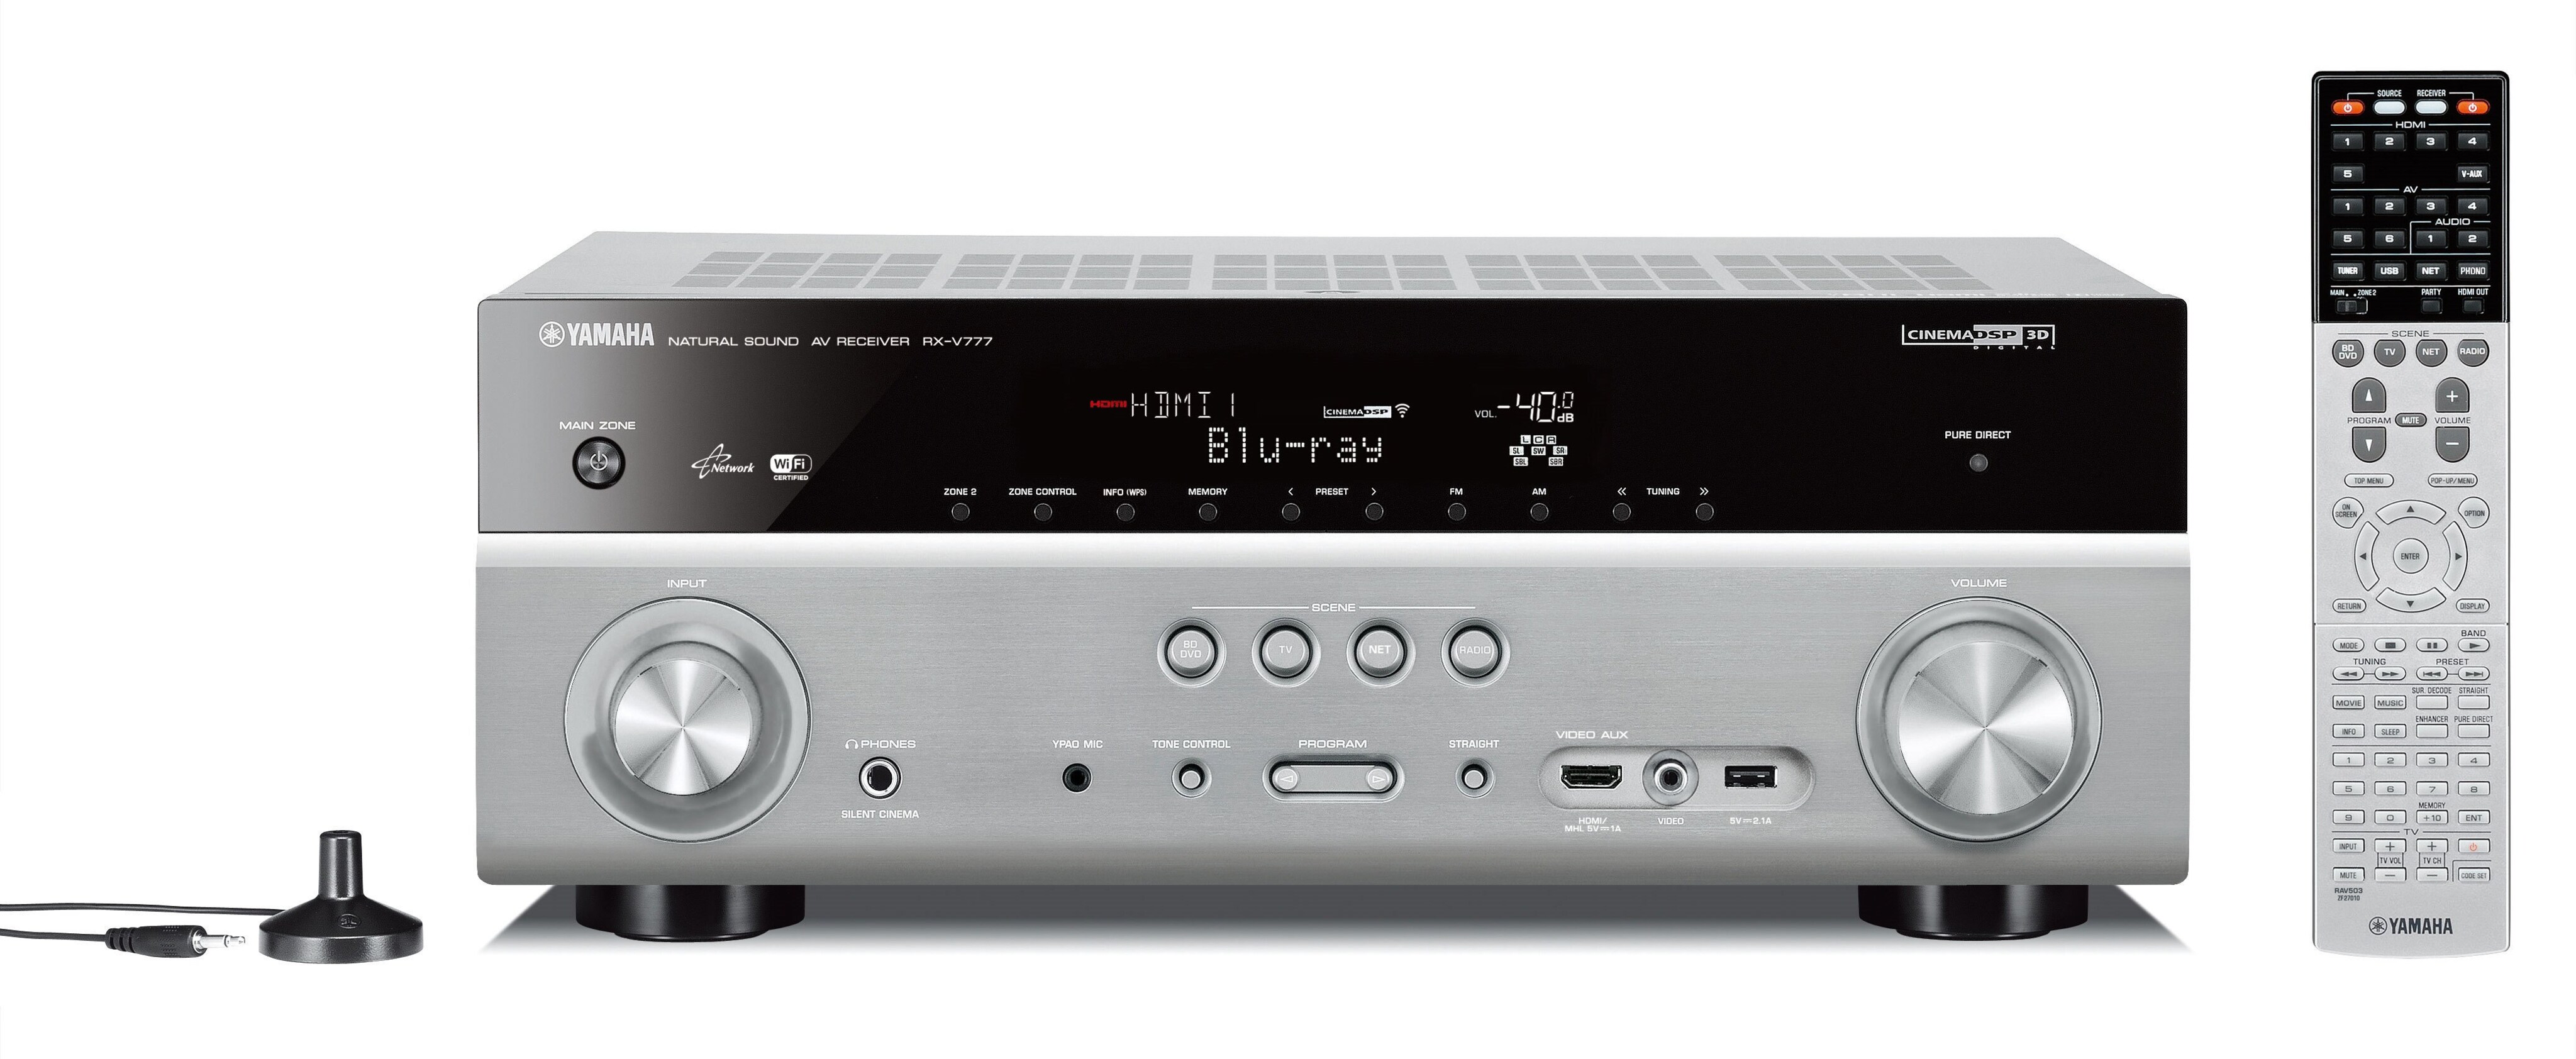 RX-V777 - Features - AV Receivers - Audio & Visual - Products